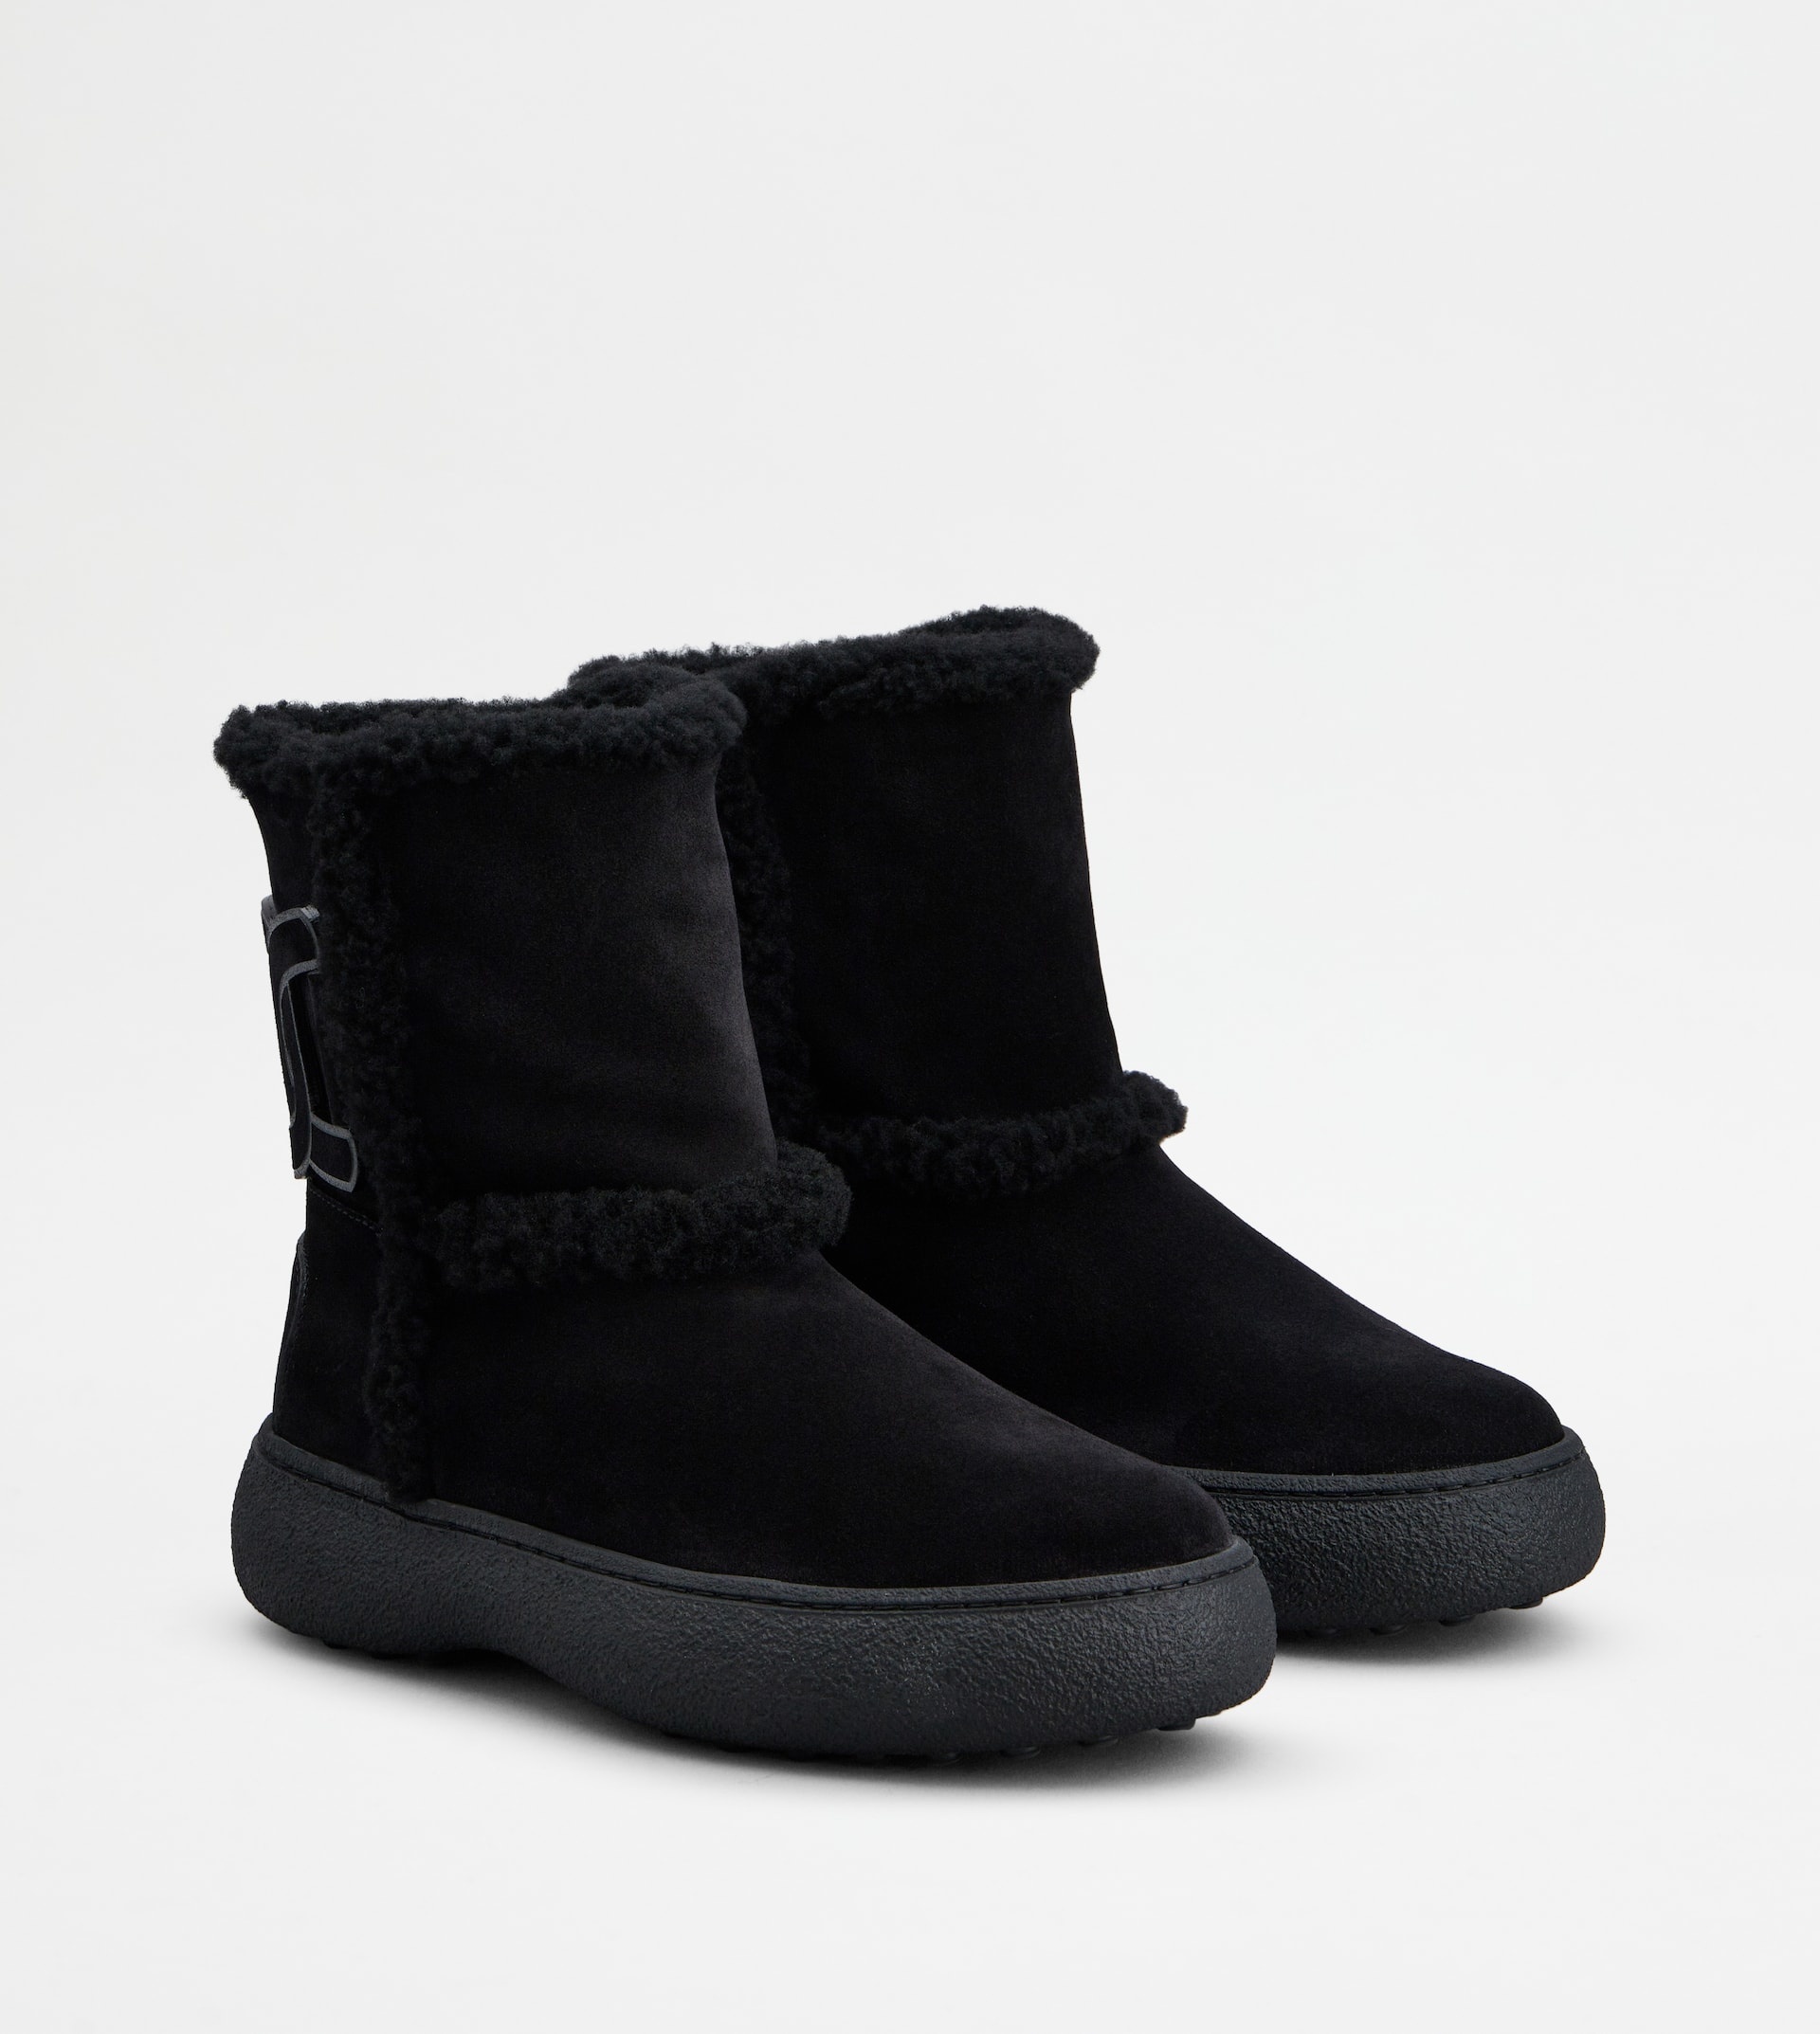 TOD'S W. G. ANKLE BOOTS IN SUEDE - BLACK - 3